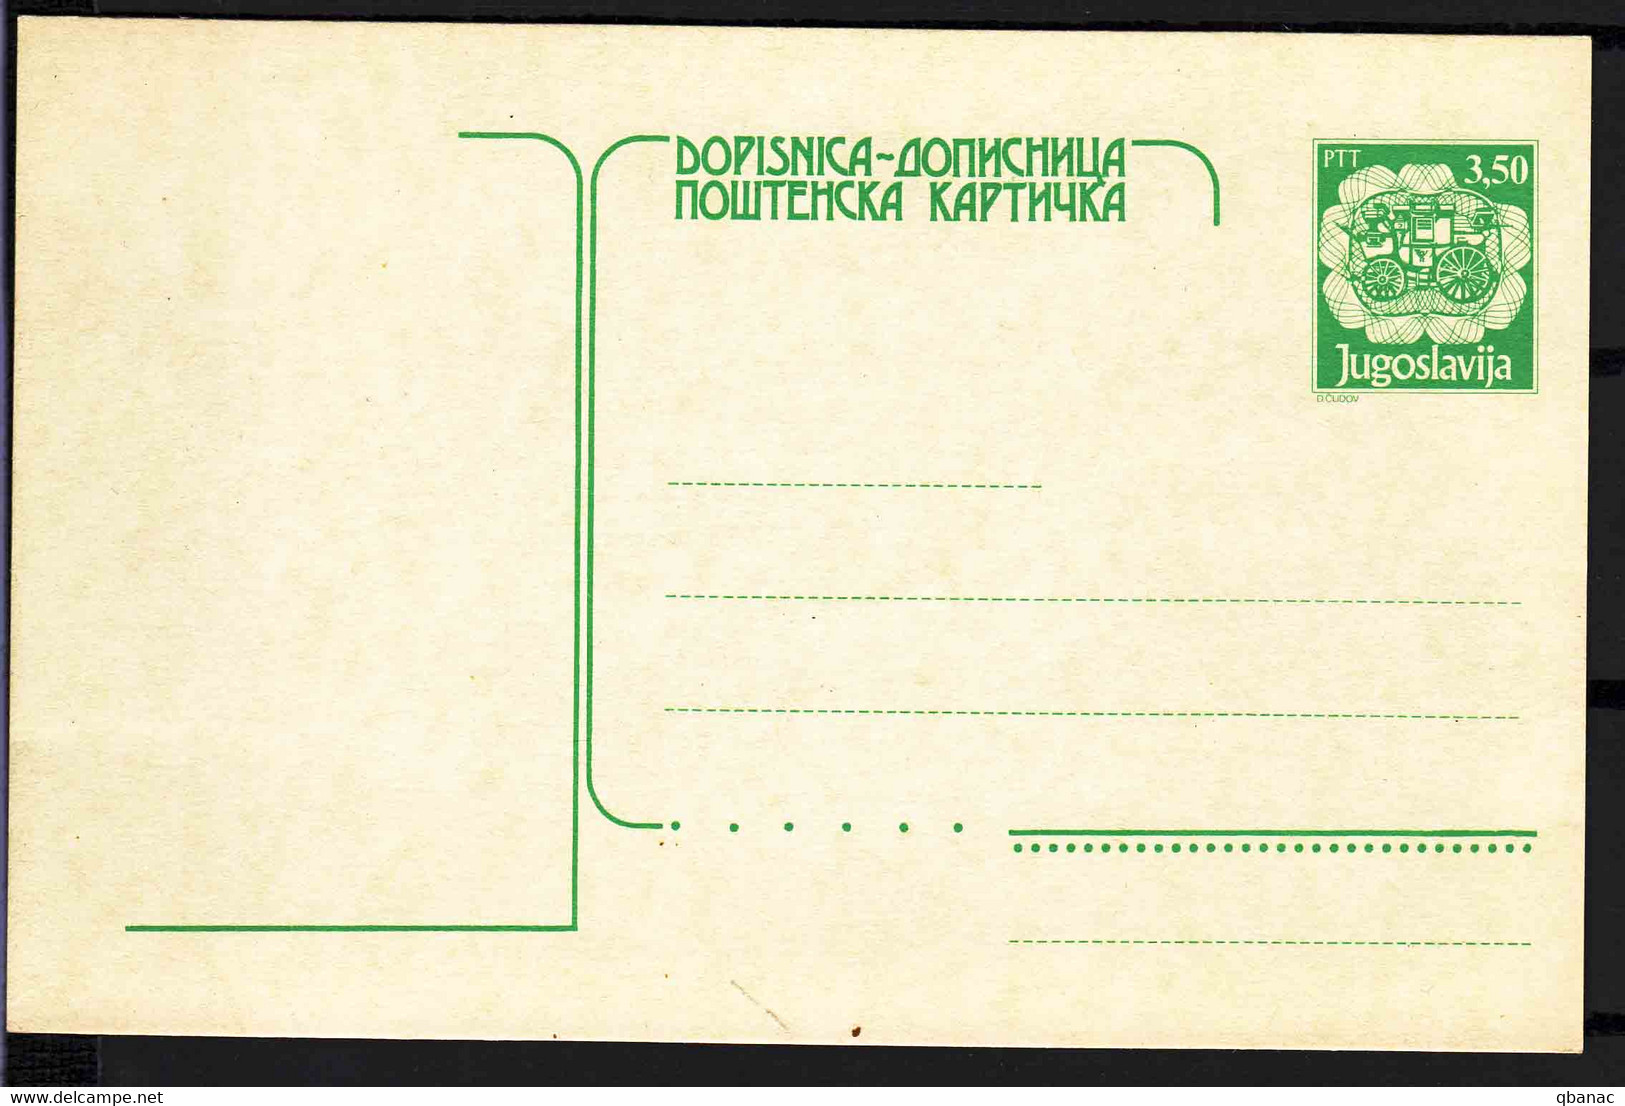 Yugoslavia Very Interesting Postal Card, Mint Condition - Covers & Documents